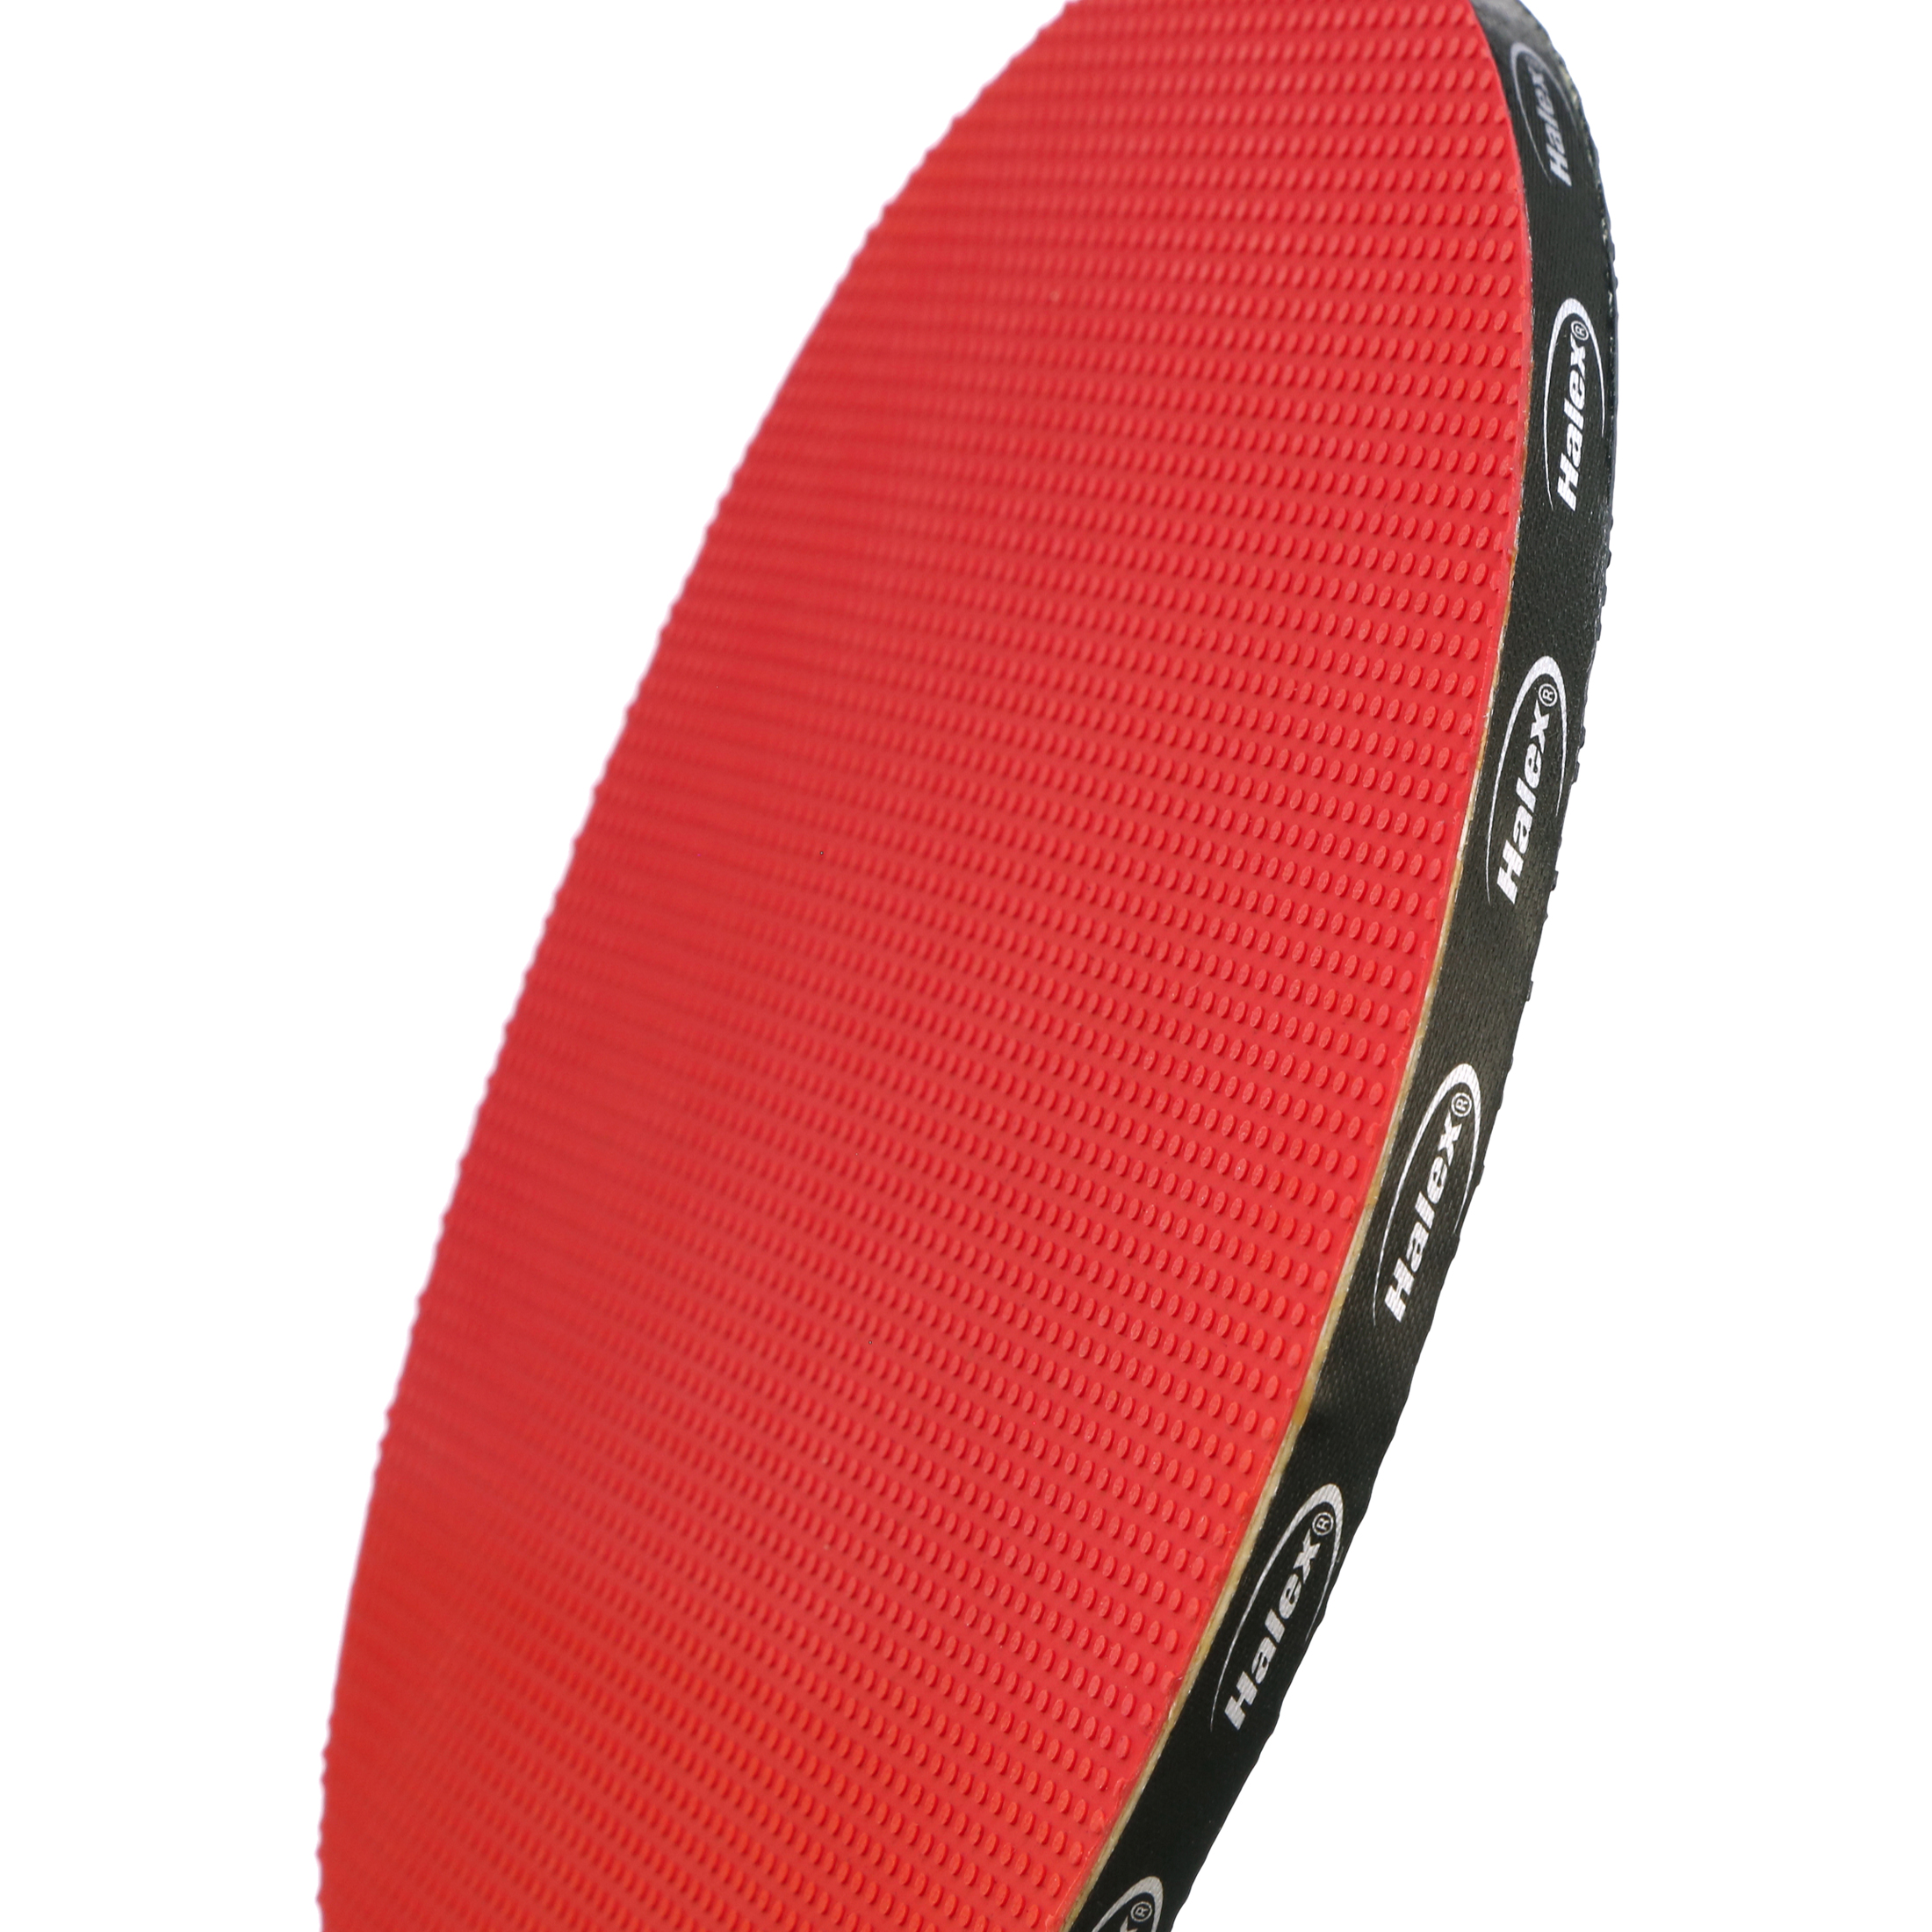 Halex Velocity Table Tennis Paddle, One Paddle, Wooden Handle - image 4 of 6